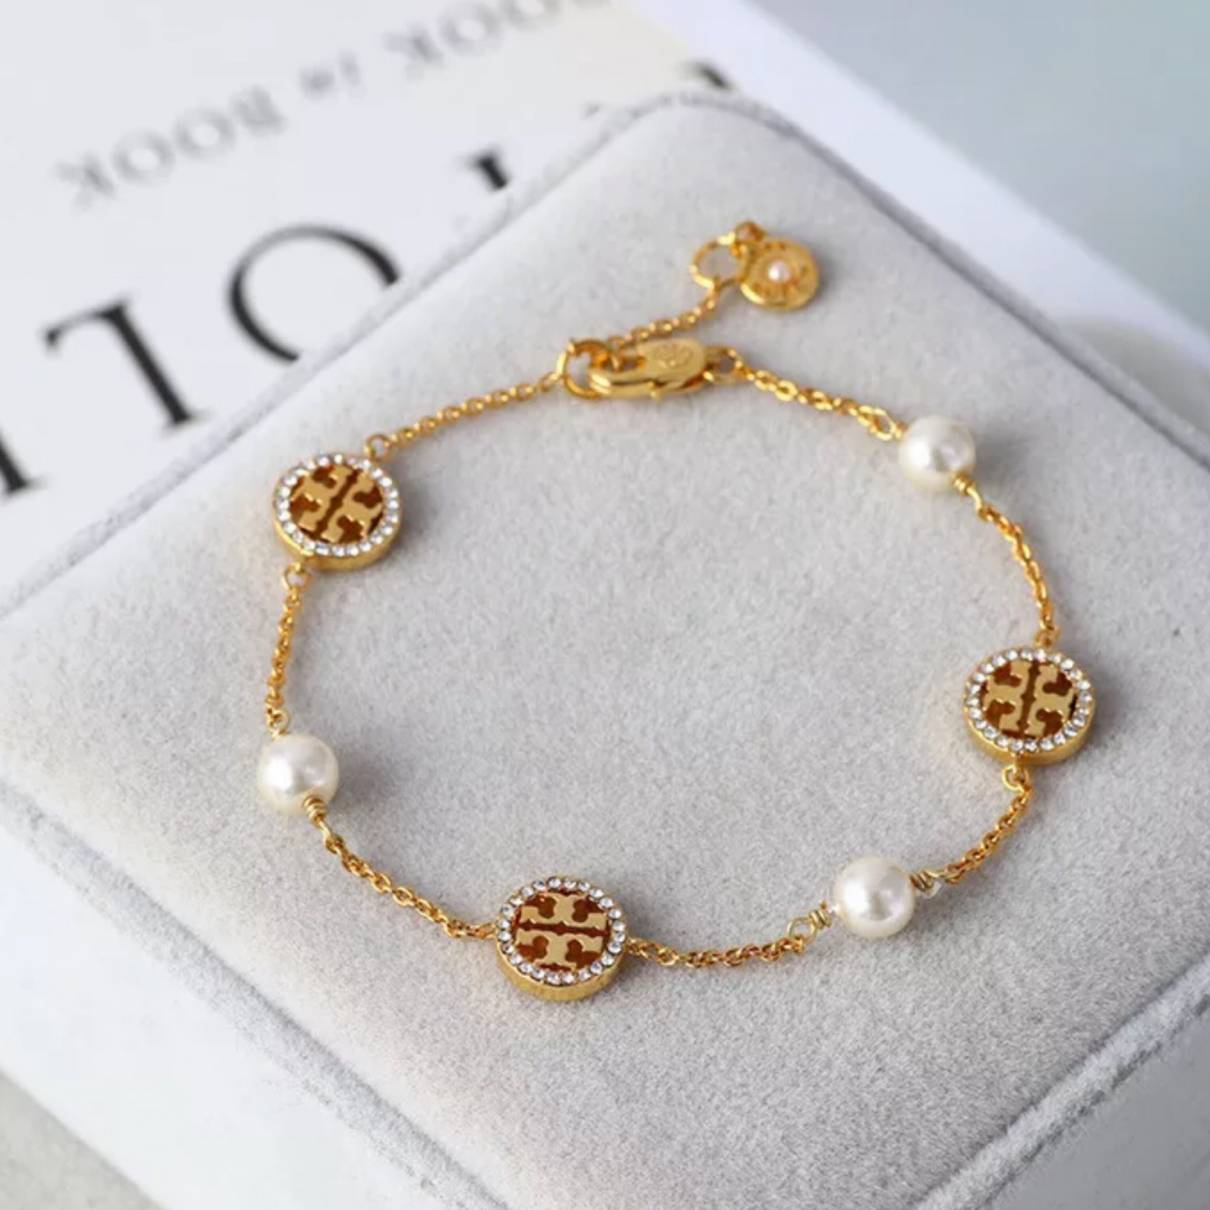 TORY BURCH CRYSTAL & PEARLY DELICATE LOGO BRACELET IN GOLD. NEW 